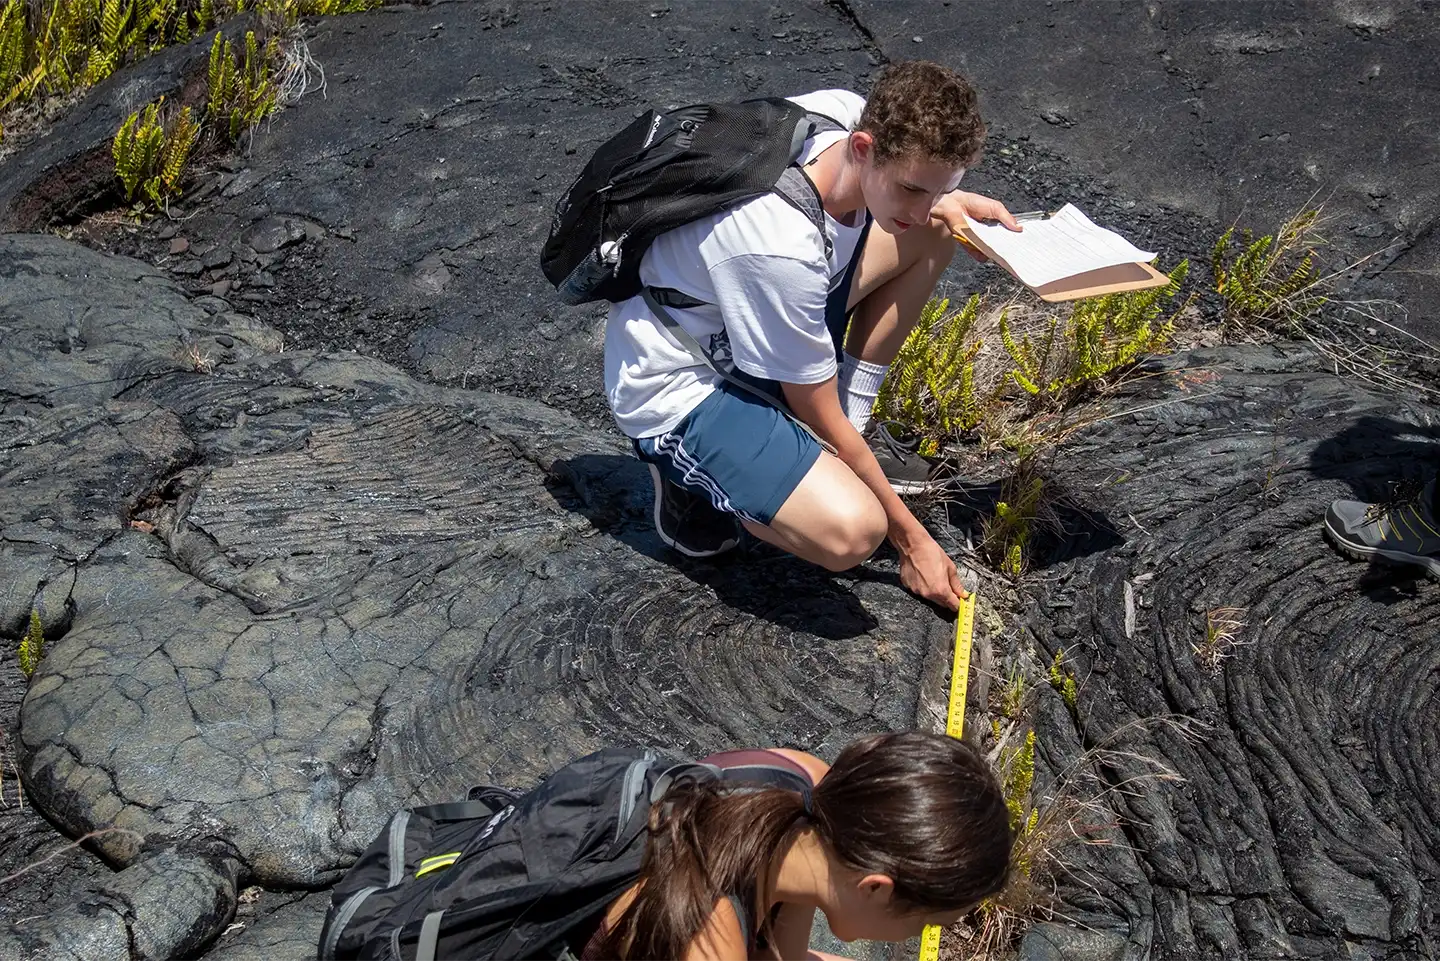 Examining fossil tree molds in the lava flows